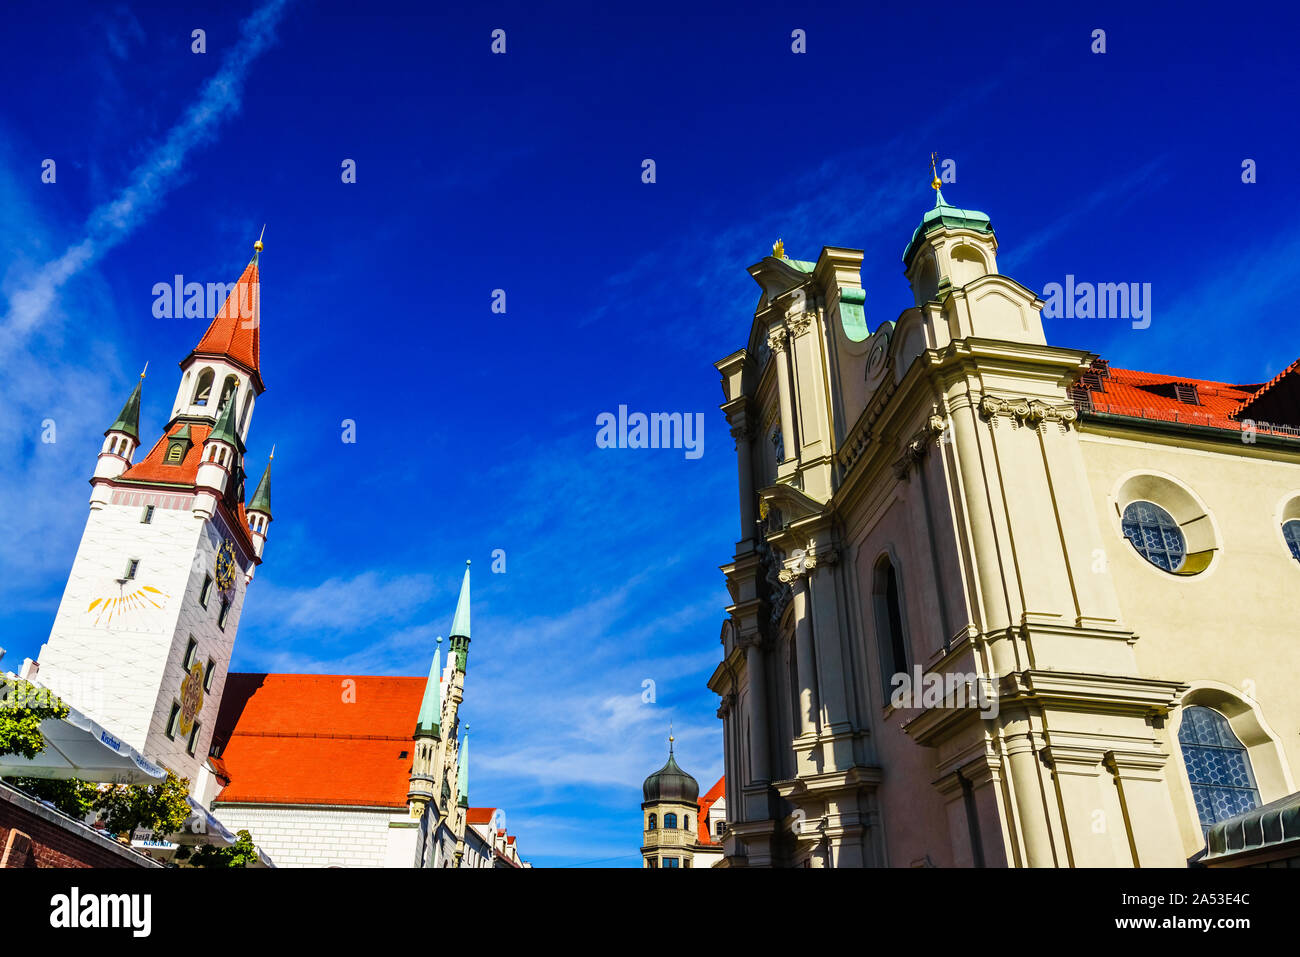 View on old town hall in the city center of Munich, Germany Stock Photo